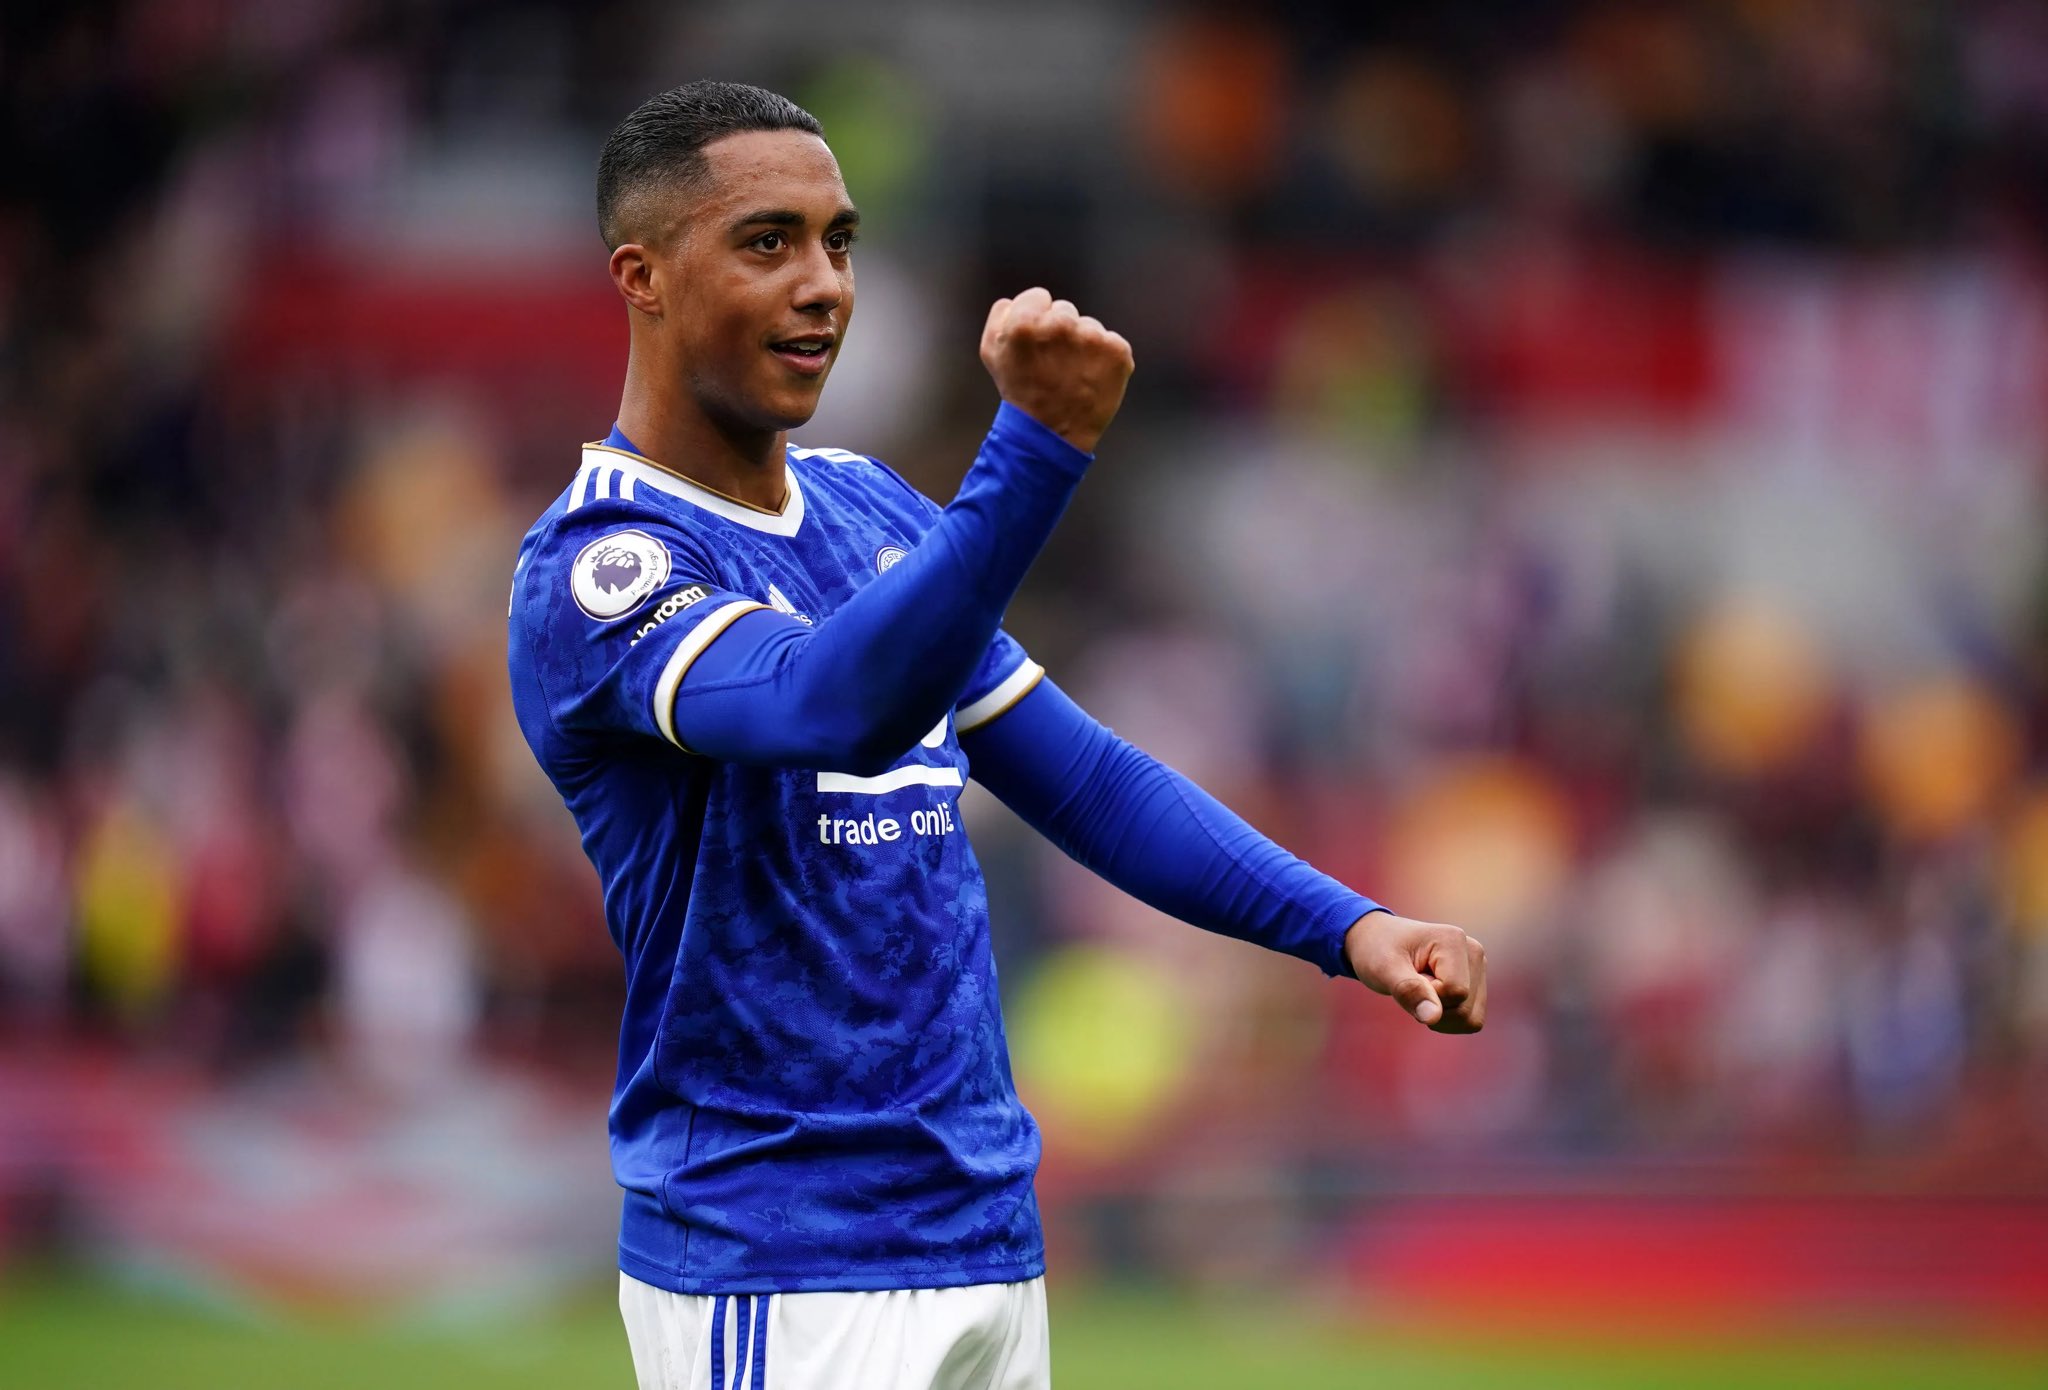 Newcastle have been told to “pay too much” for Manchester United target Youri Tielemans